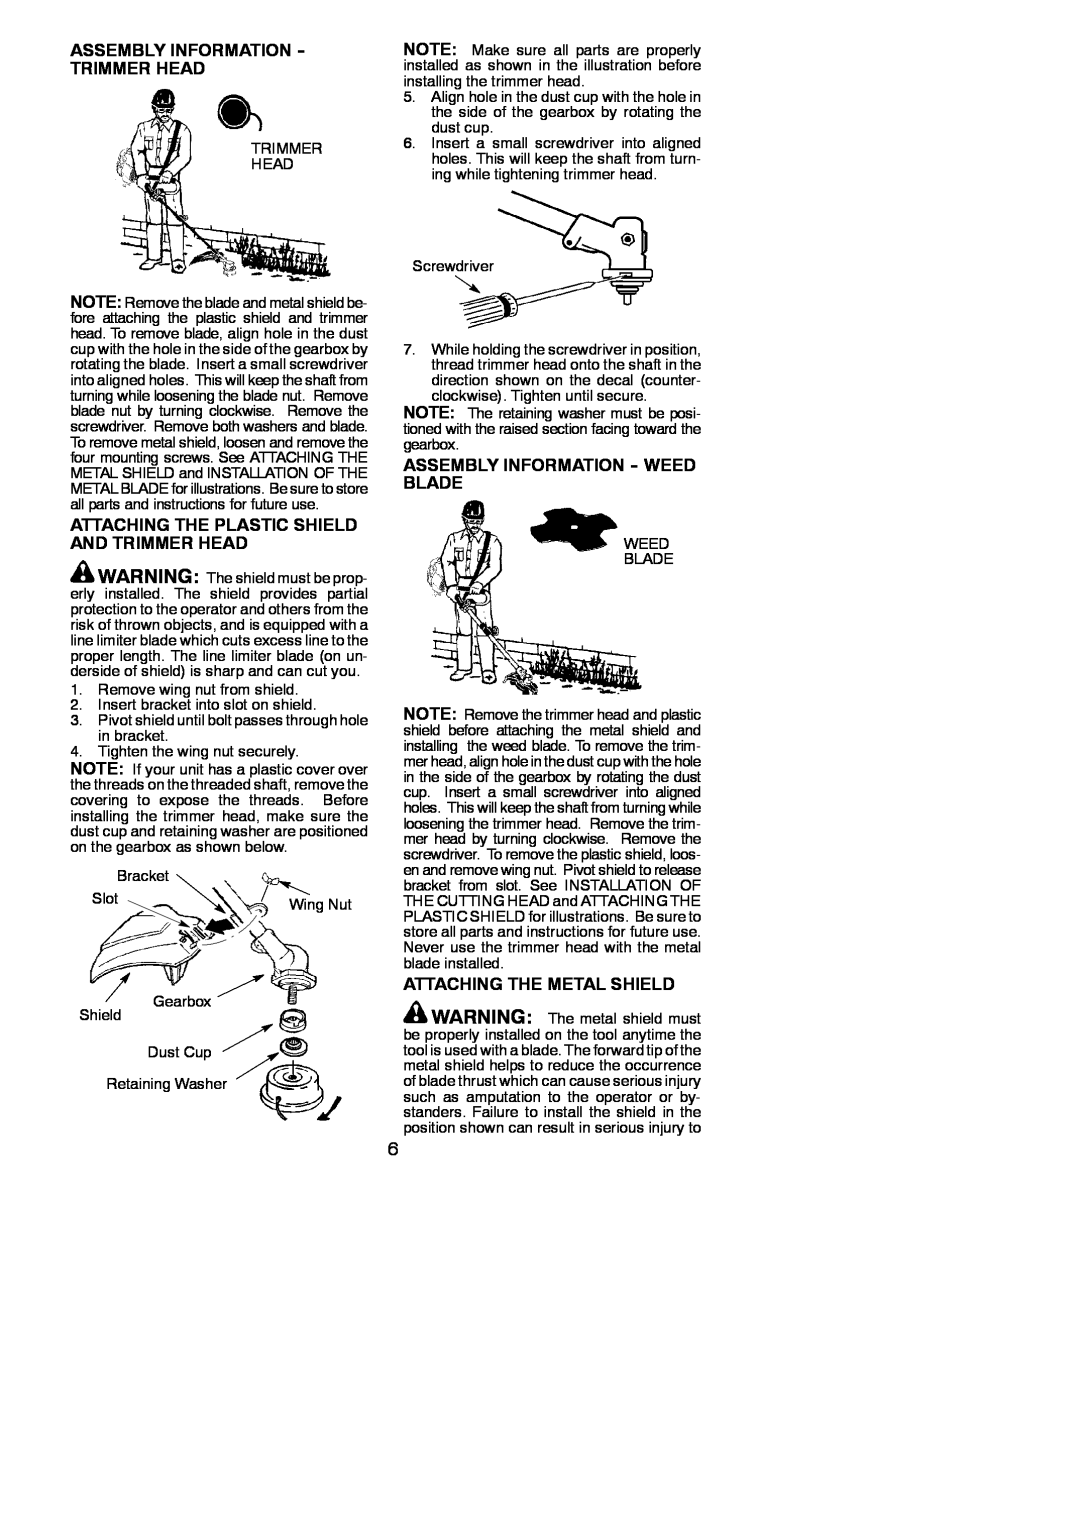 Poulan PP336 instruction manual Assembly Information - Trimmer Head, Attaching The Plastic Shield And Trimmer Head 